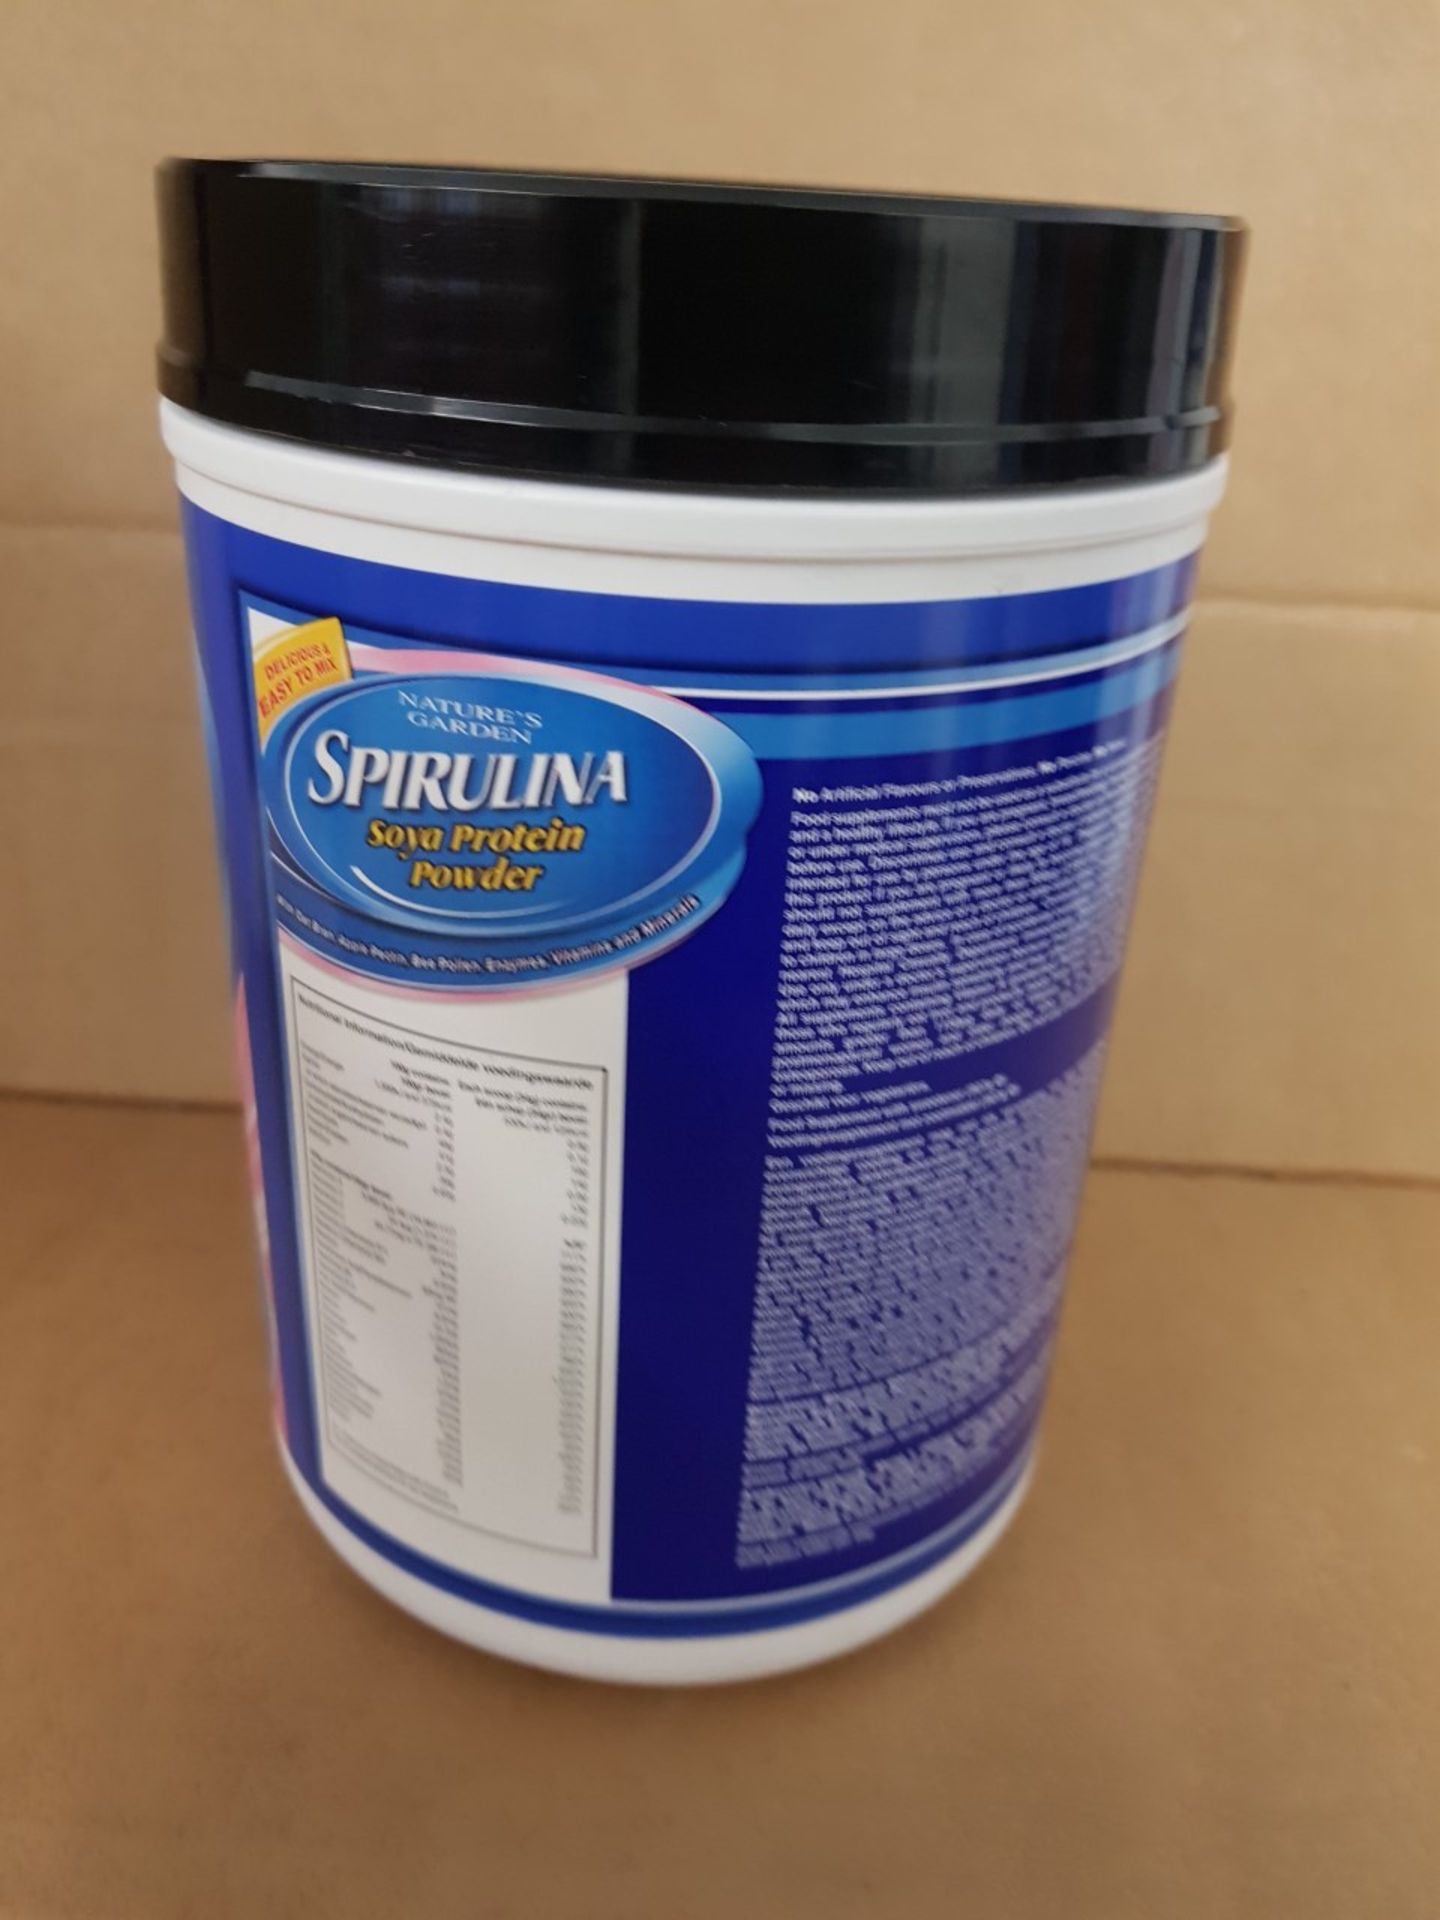 40 x NEW & SEALED 907G Tubs of Nature's Garden Spirulina - Soya Protein Powder. Makes delicious - Image 7 of 10